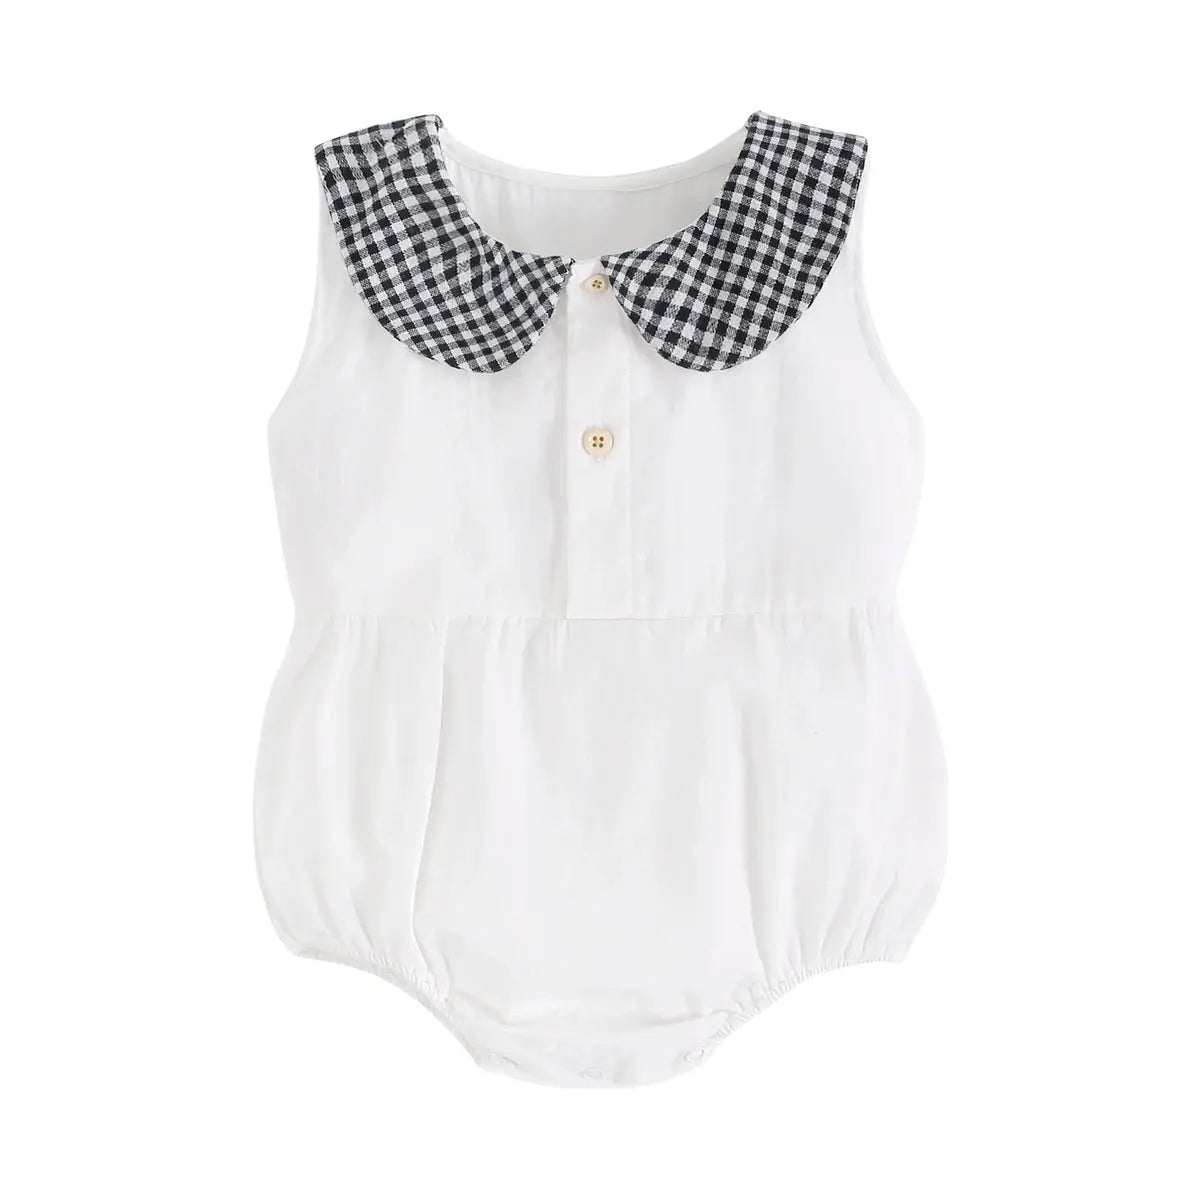 White sleeveless Spring &amp; Summer Baby Onesie with a black and white gingham collar and front button by Soulful Trading.